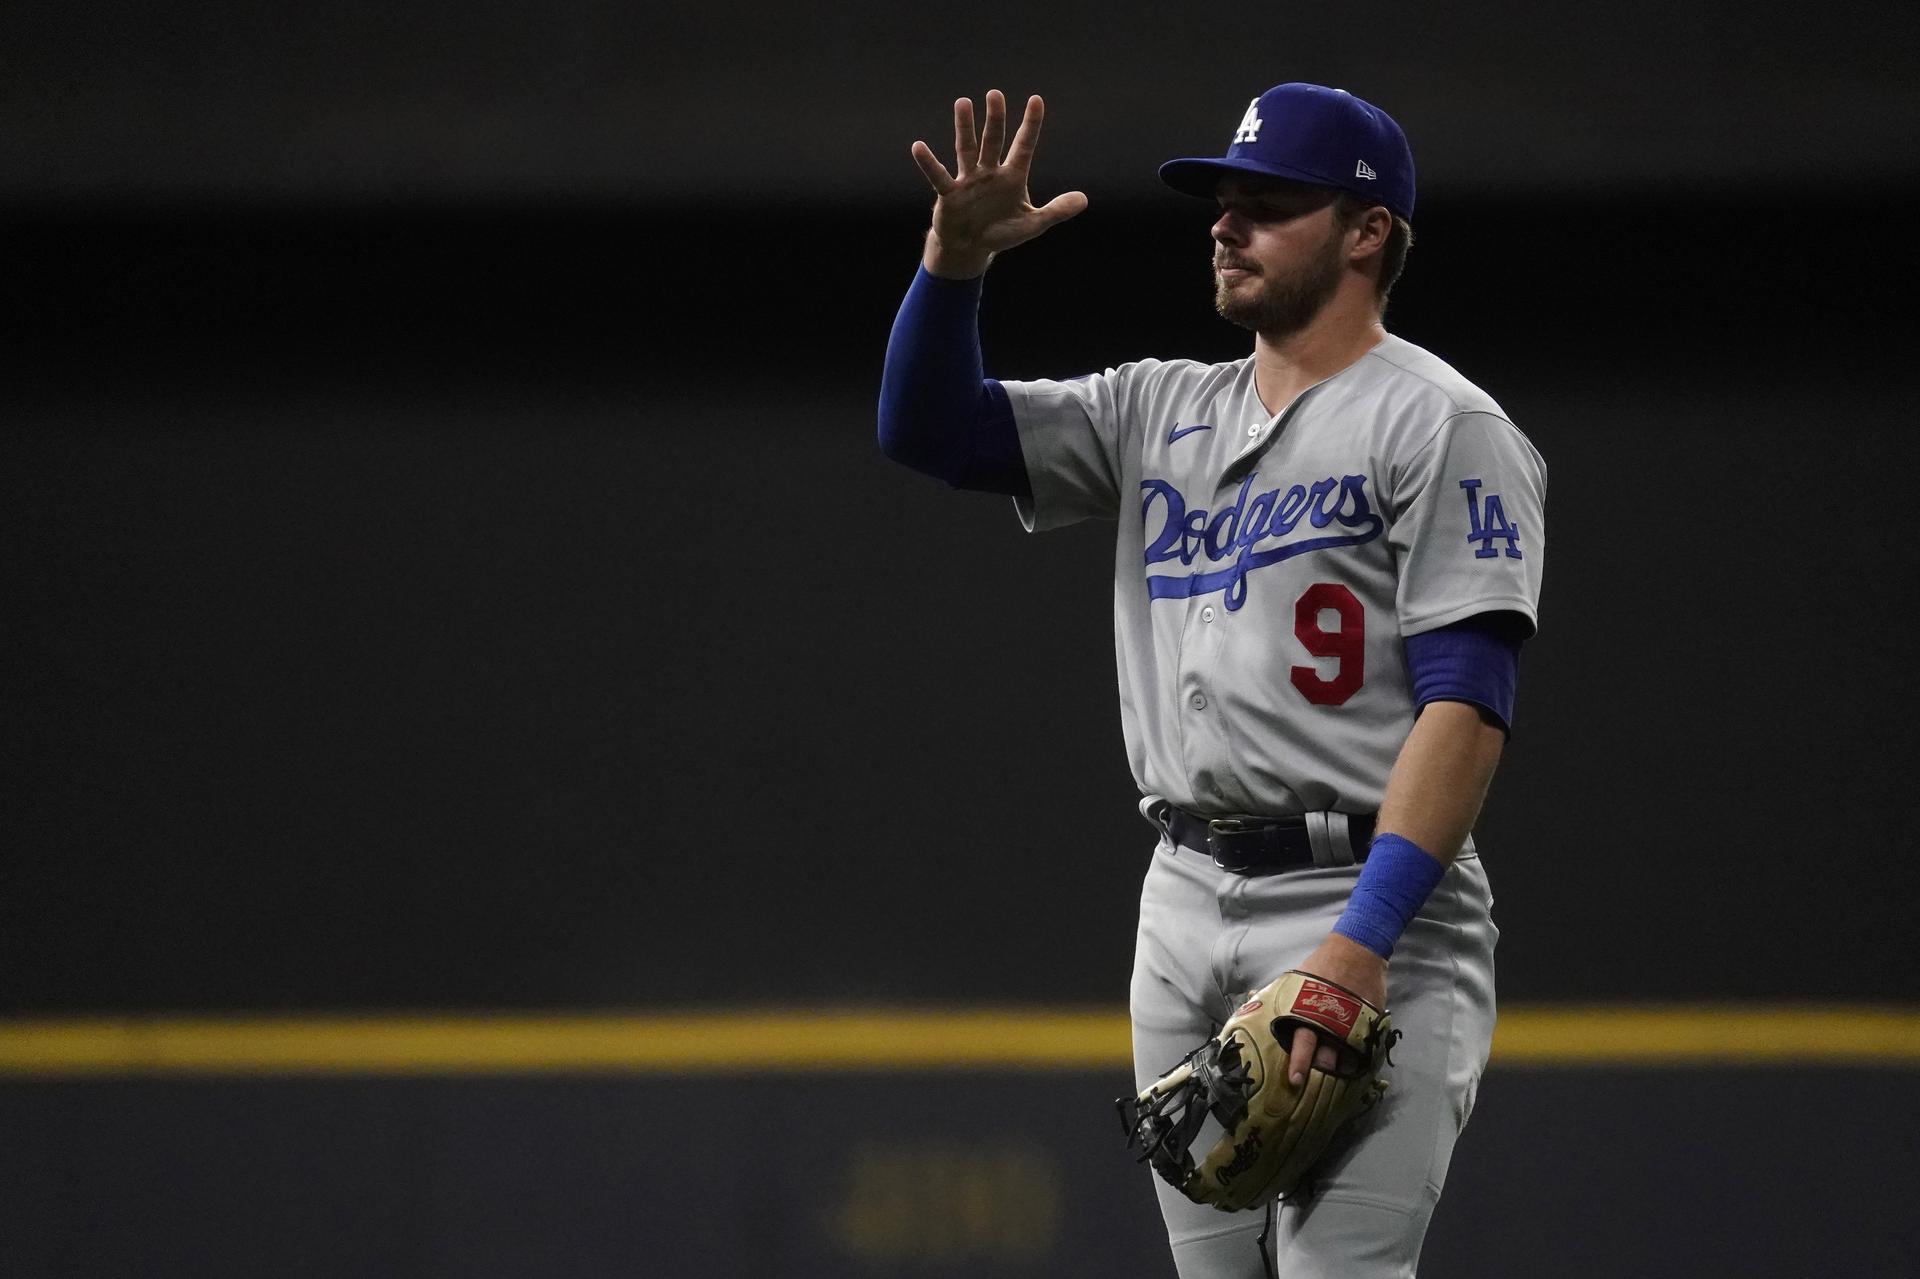 Dodgers player Gavin Lux holds up his hand while on the field